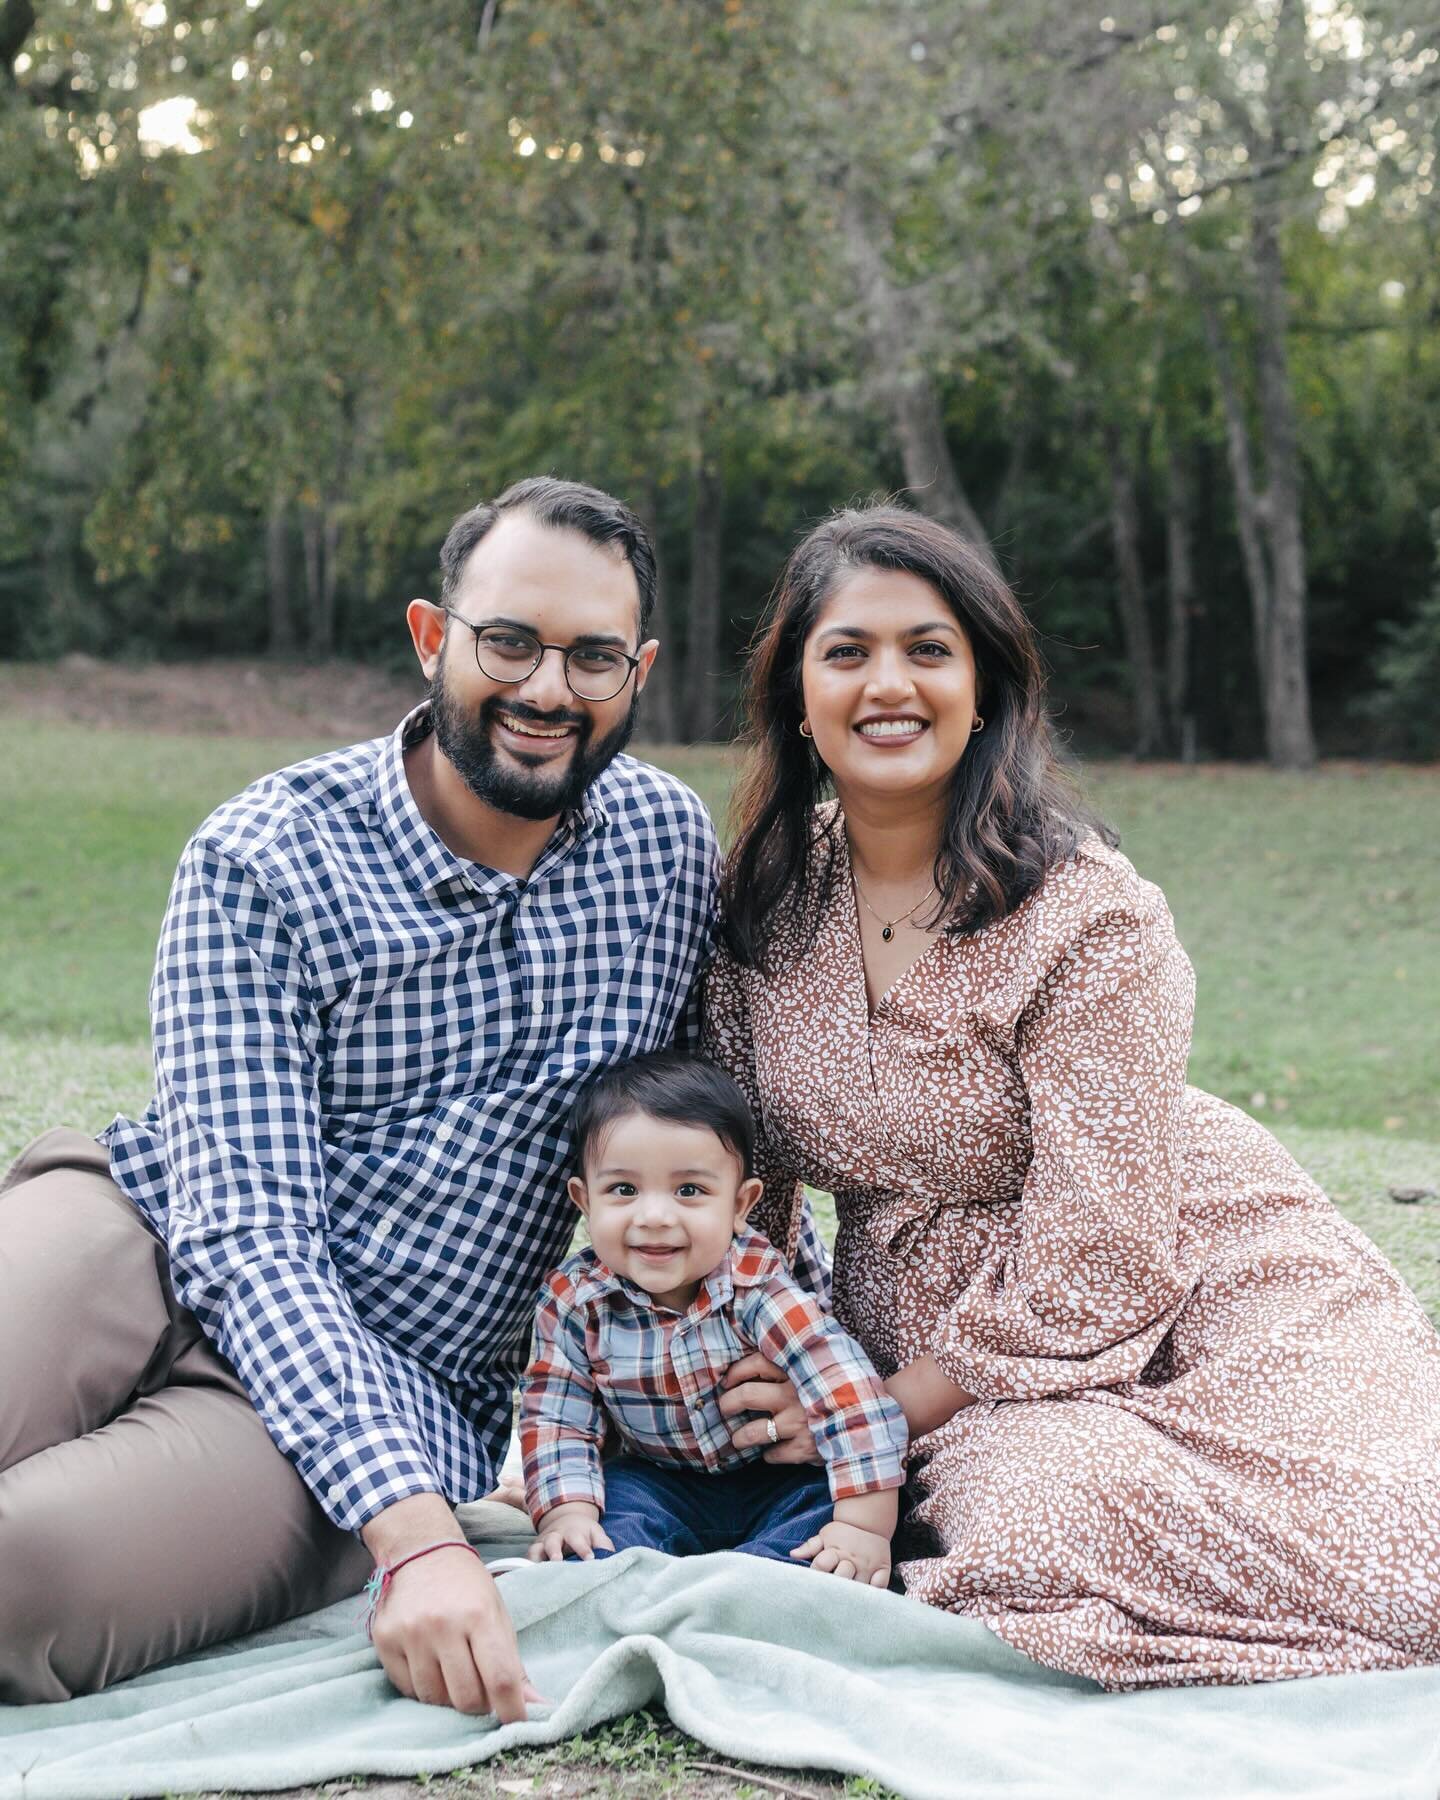 Some previews for @suriodhav and her family featuring the absolute cutest nugget who everyone had to get a photo with! Can&rsquo;t wait to deliver the rest of these of the whole extended family soon!

#houstonfamilyphotographer #houstonportraitphotog